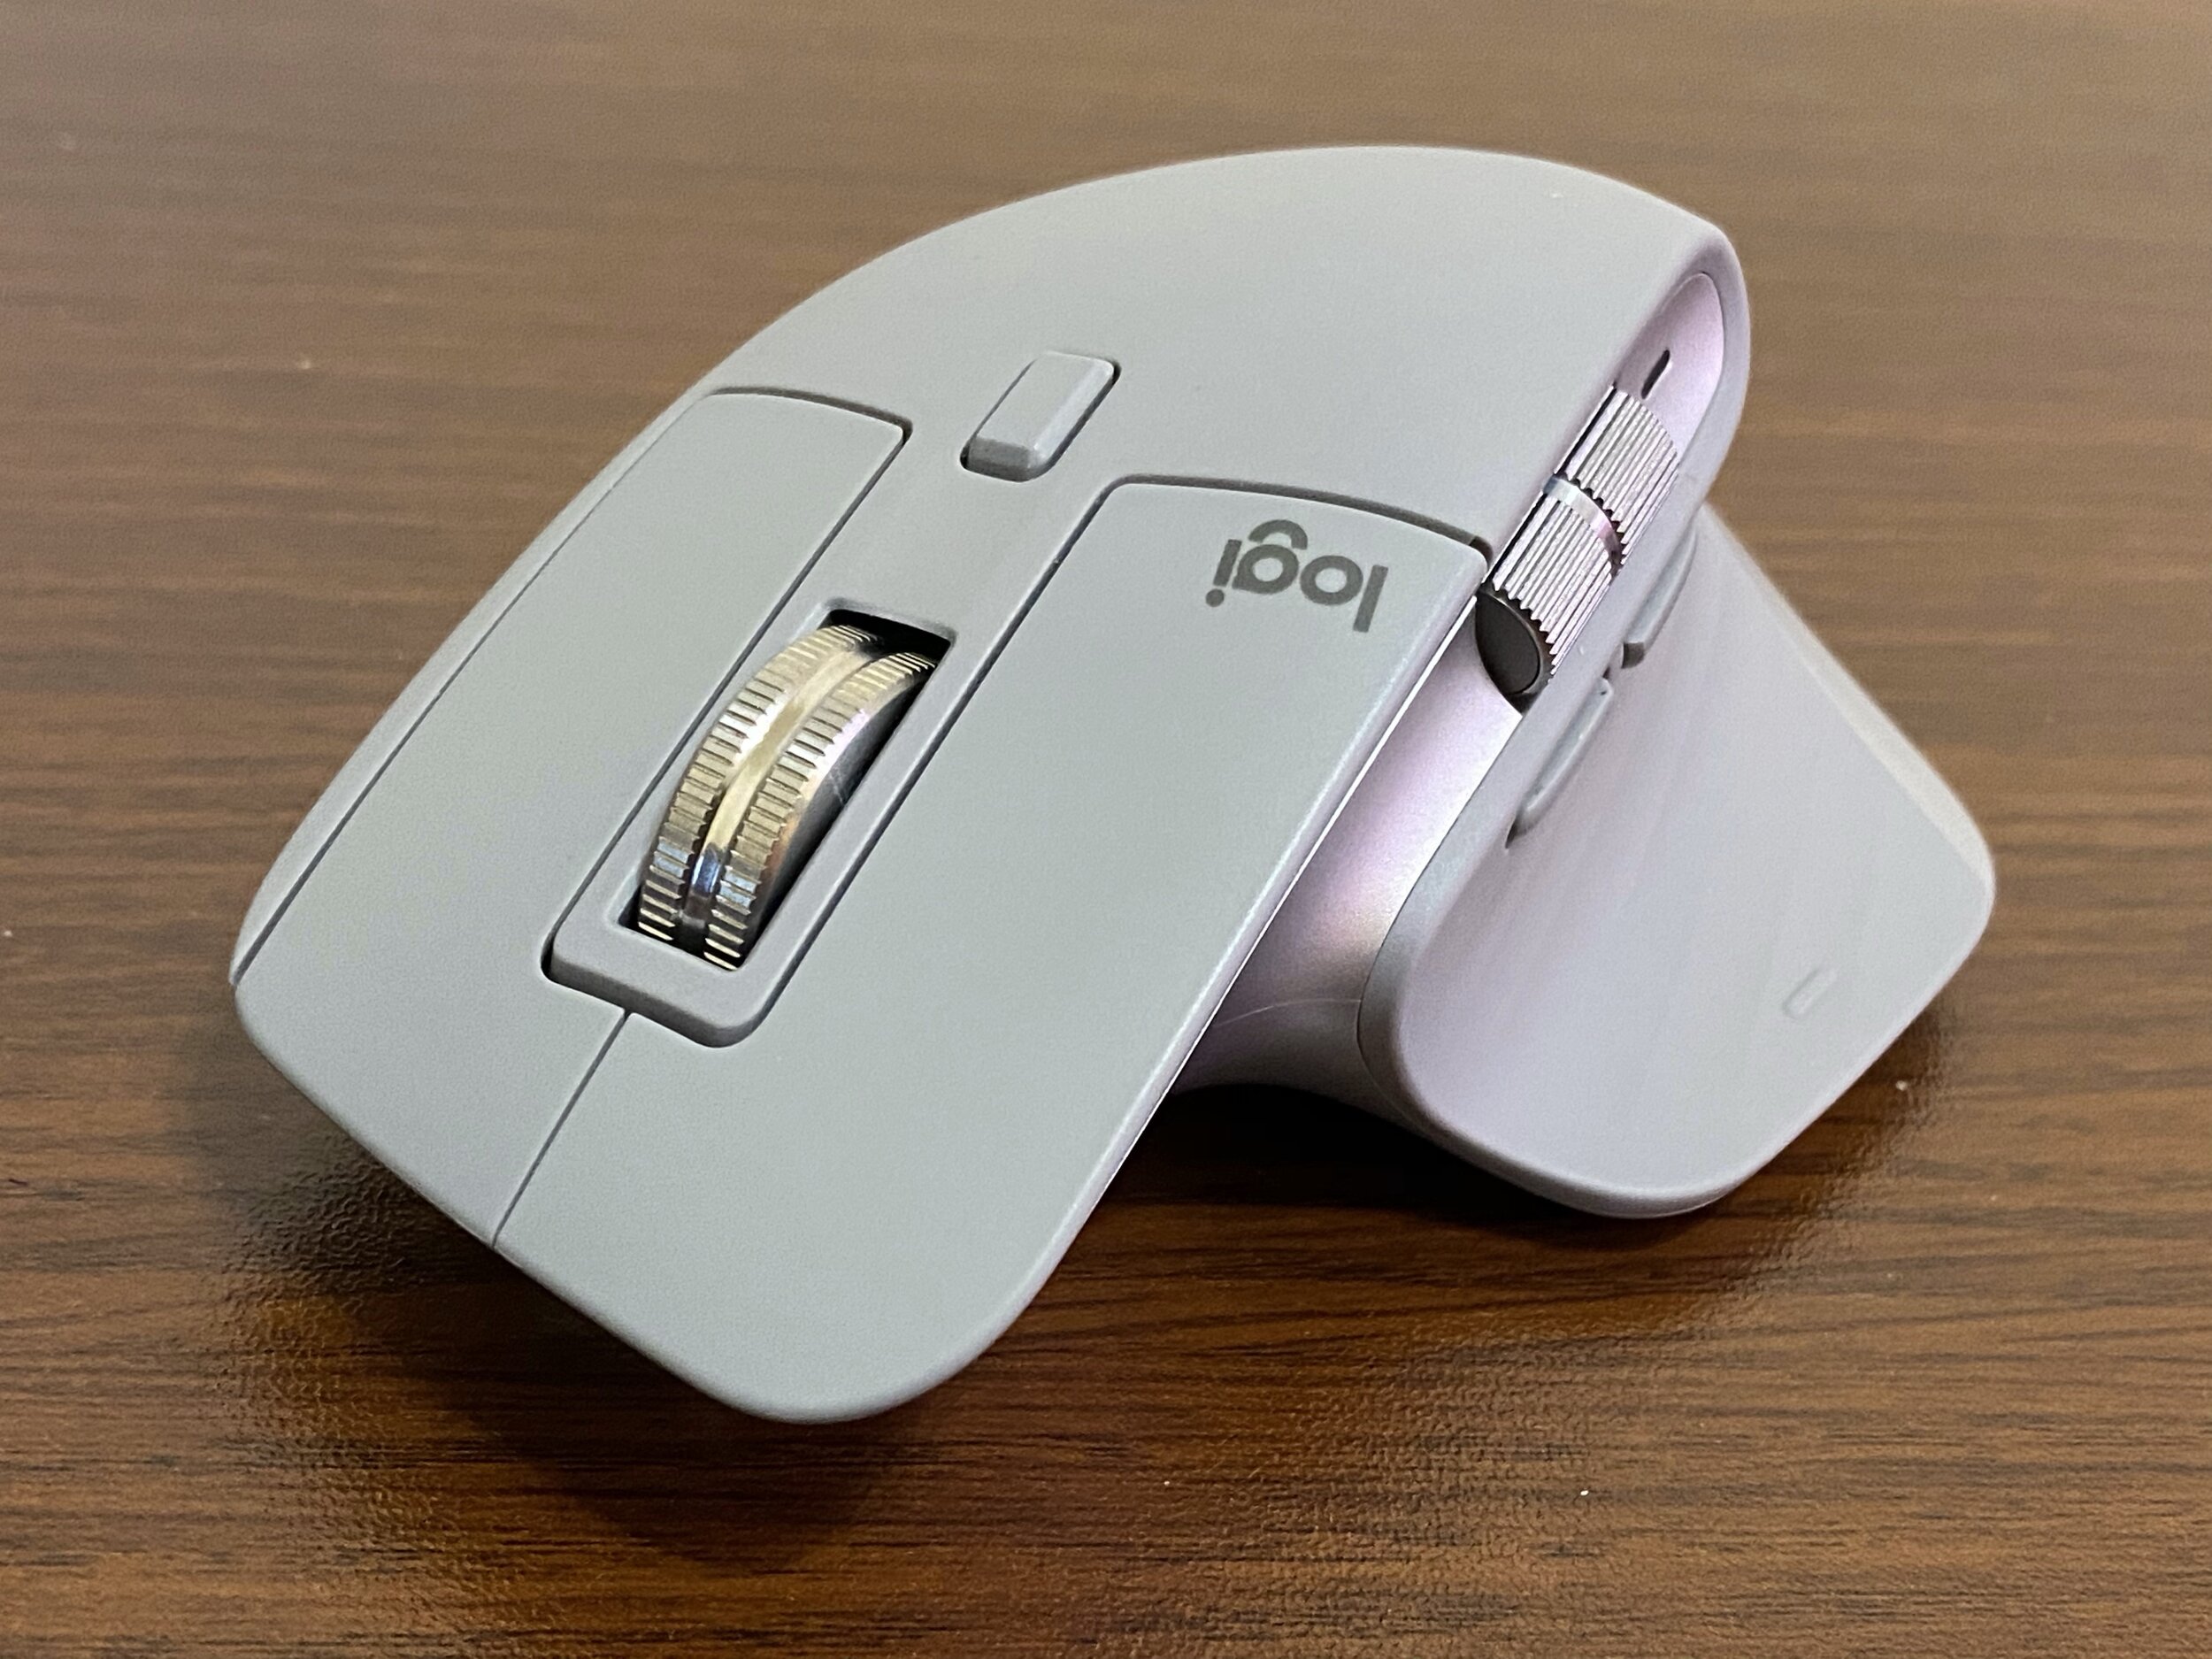 Logitech MX Master 3: An Imperfect Mouse with a Great Feature Set